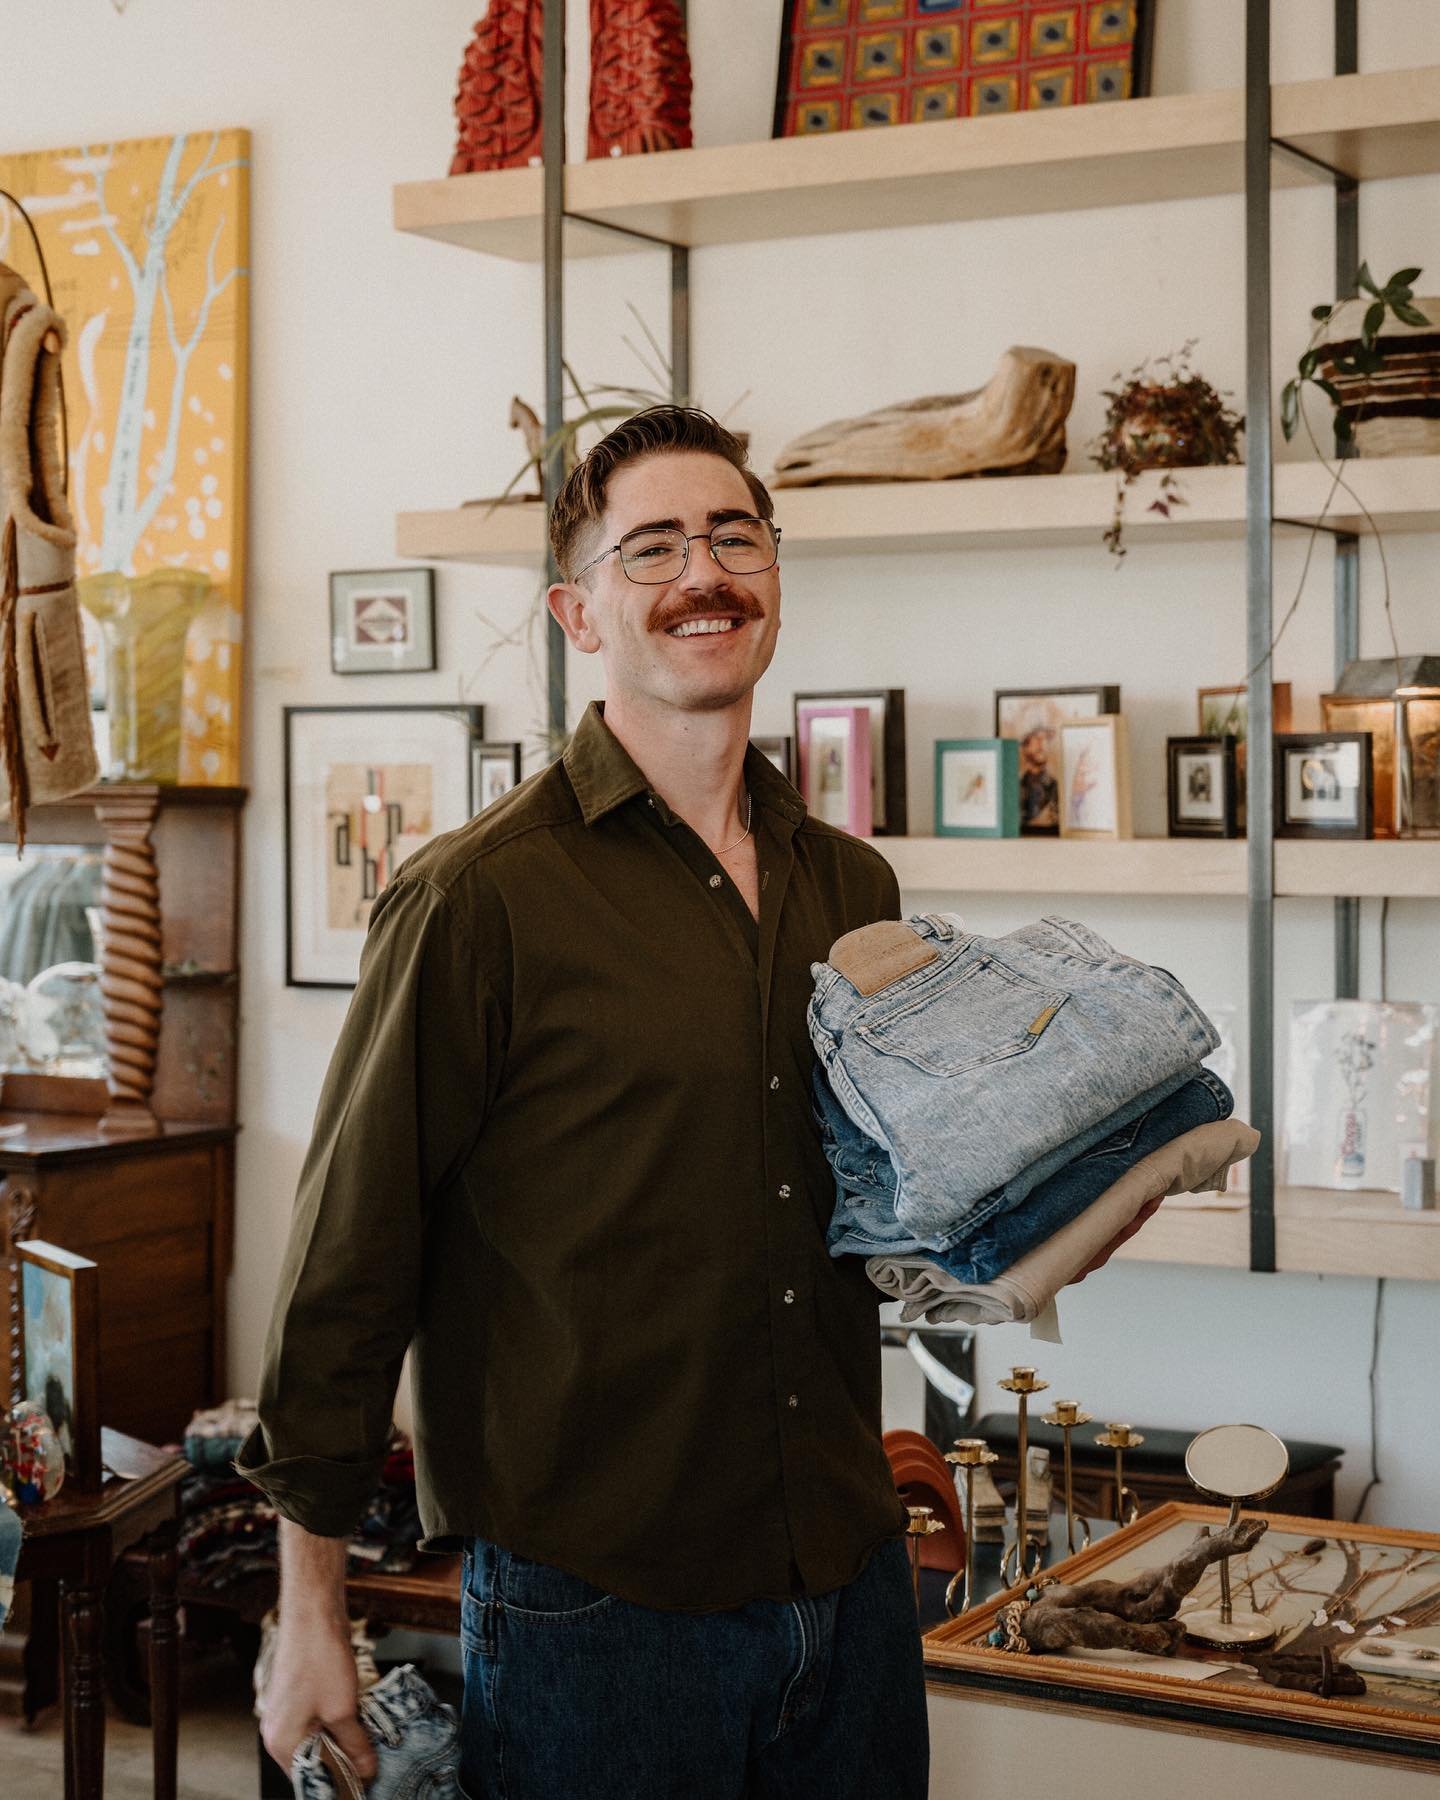 Don&rsquo;t you just love it when you meet a new person and immediately feel like we&rsquo;ve known each other forever haha. Cody, thank you for letting me capture some gorgeous photos of your beautiful store! Can&rsquo;t wait to do this again and y&